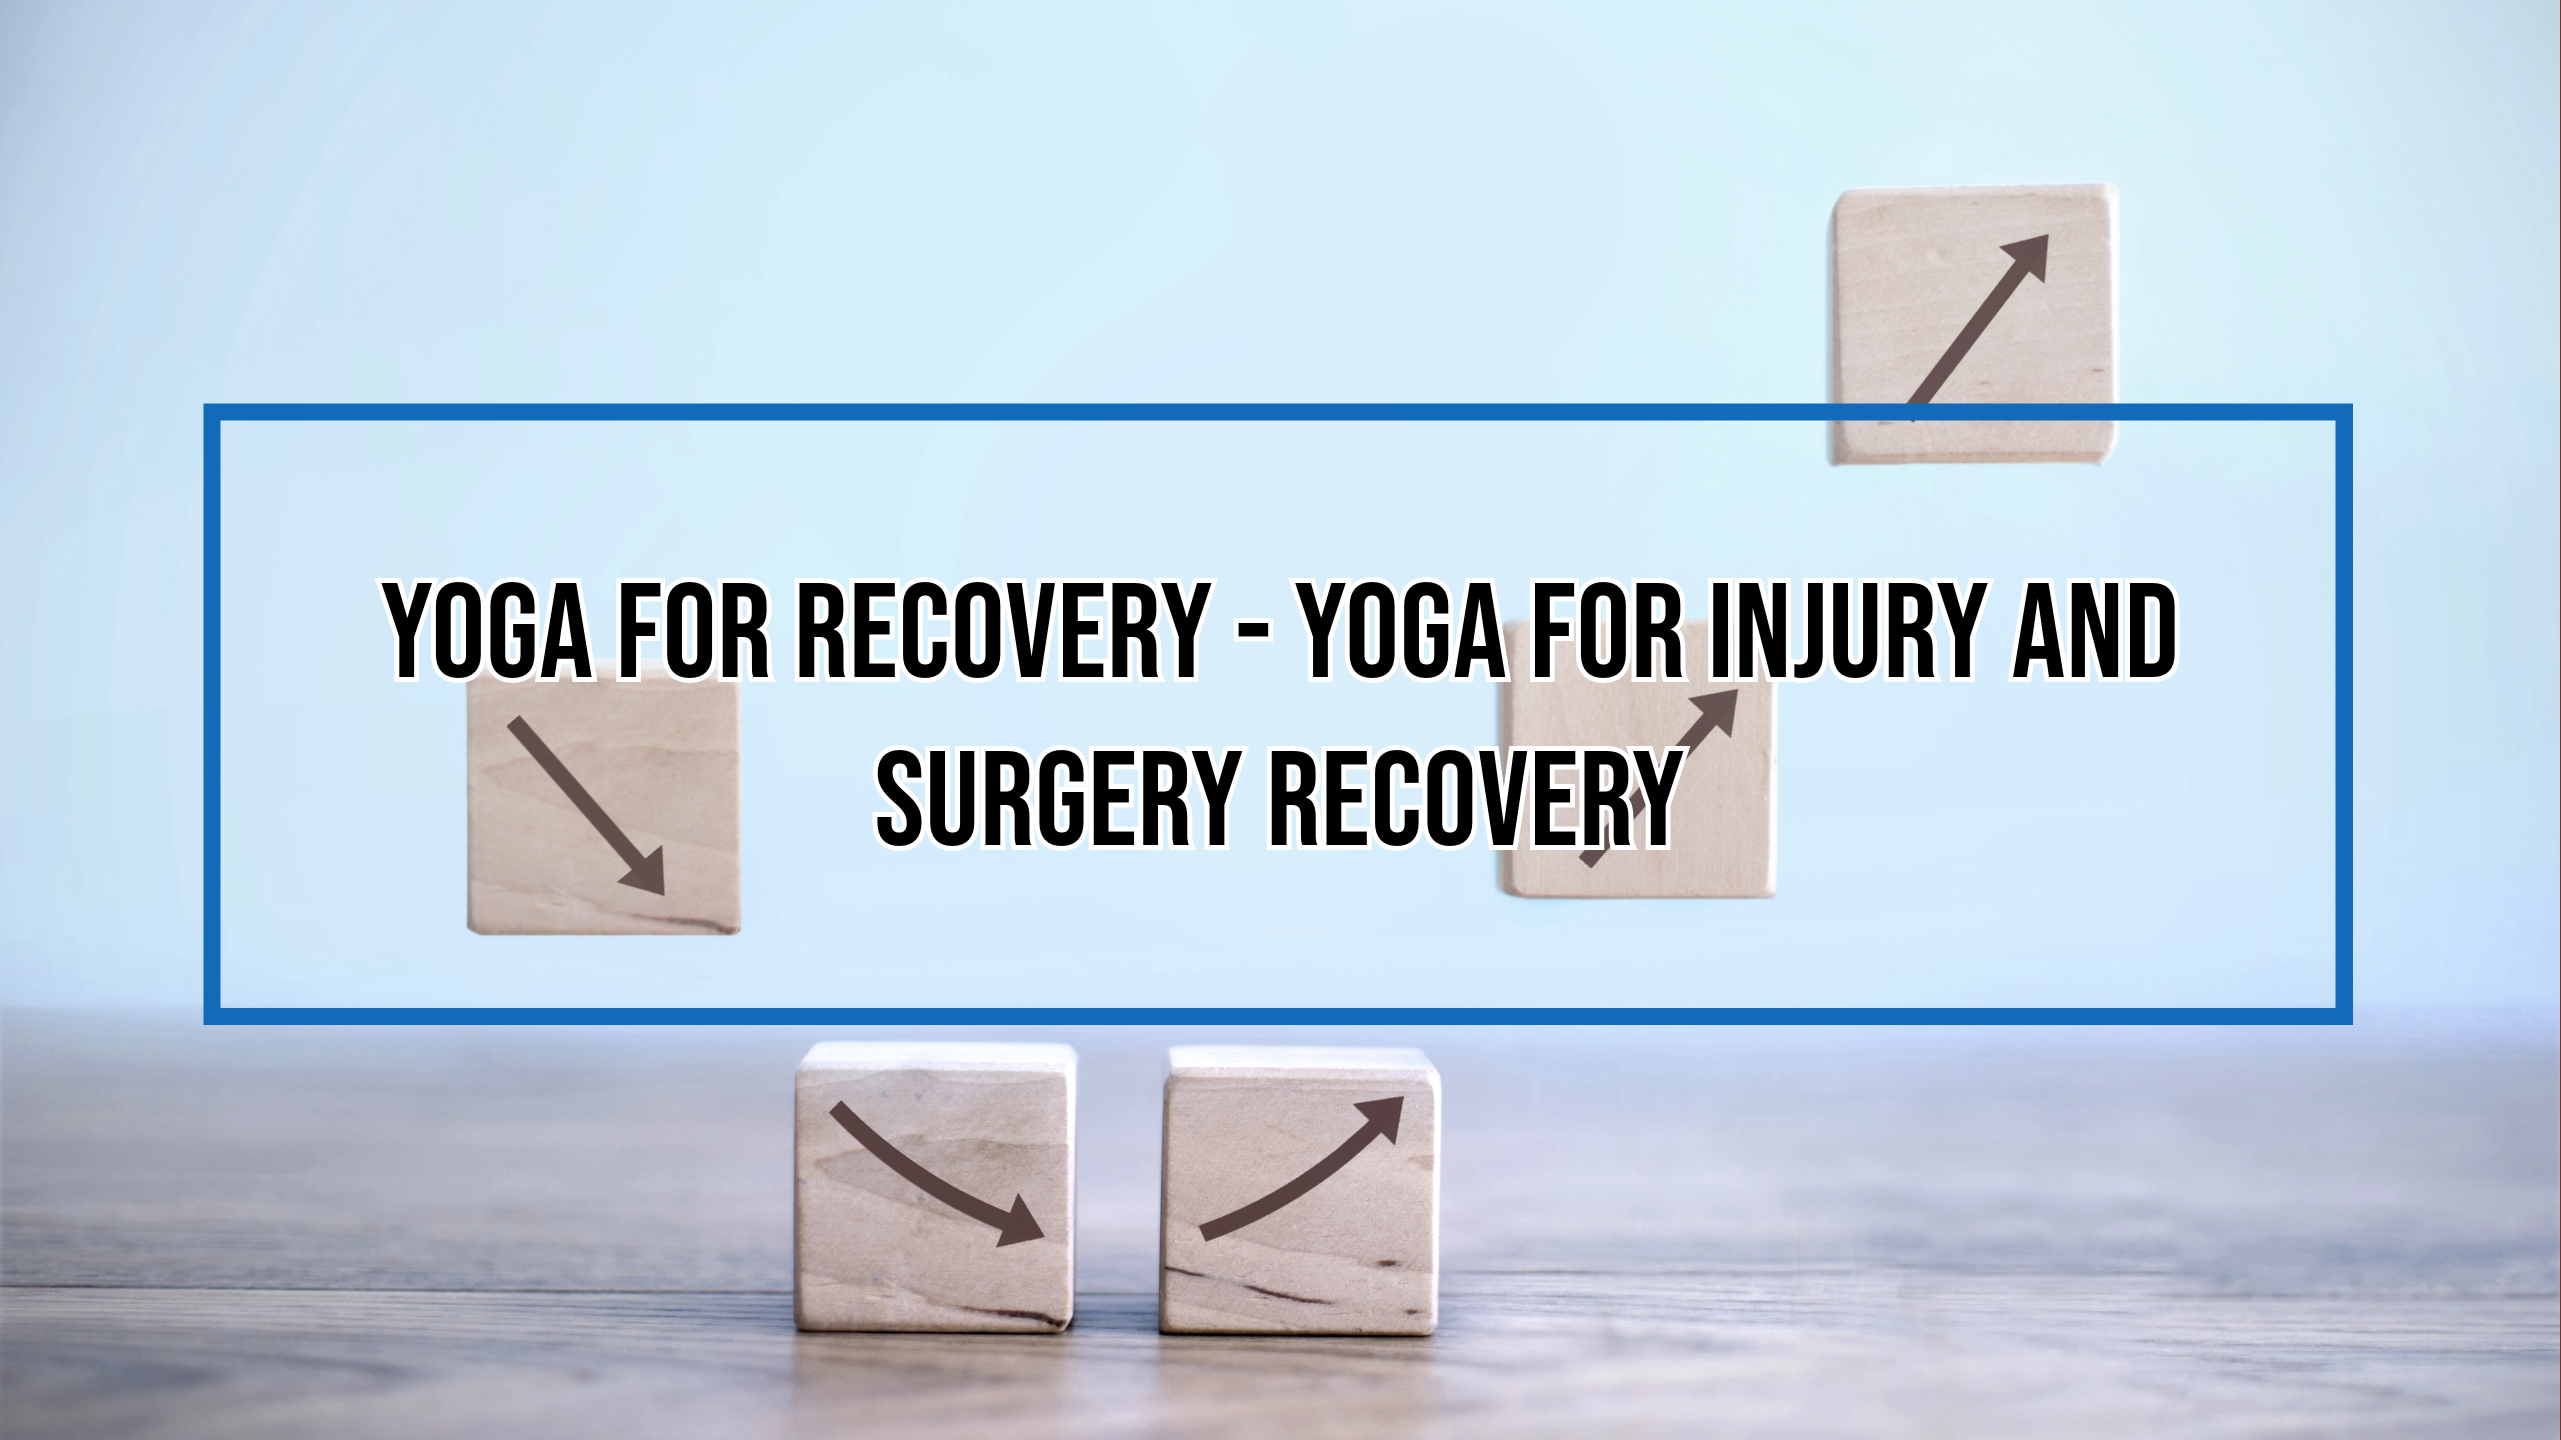 Yoga for Recovery - Yoga for Injury and Surgery Recovery